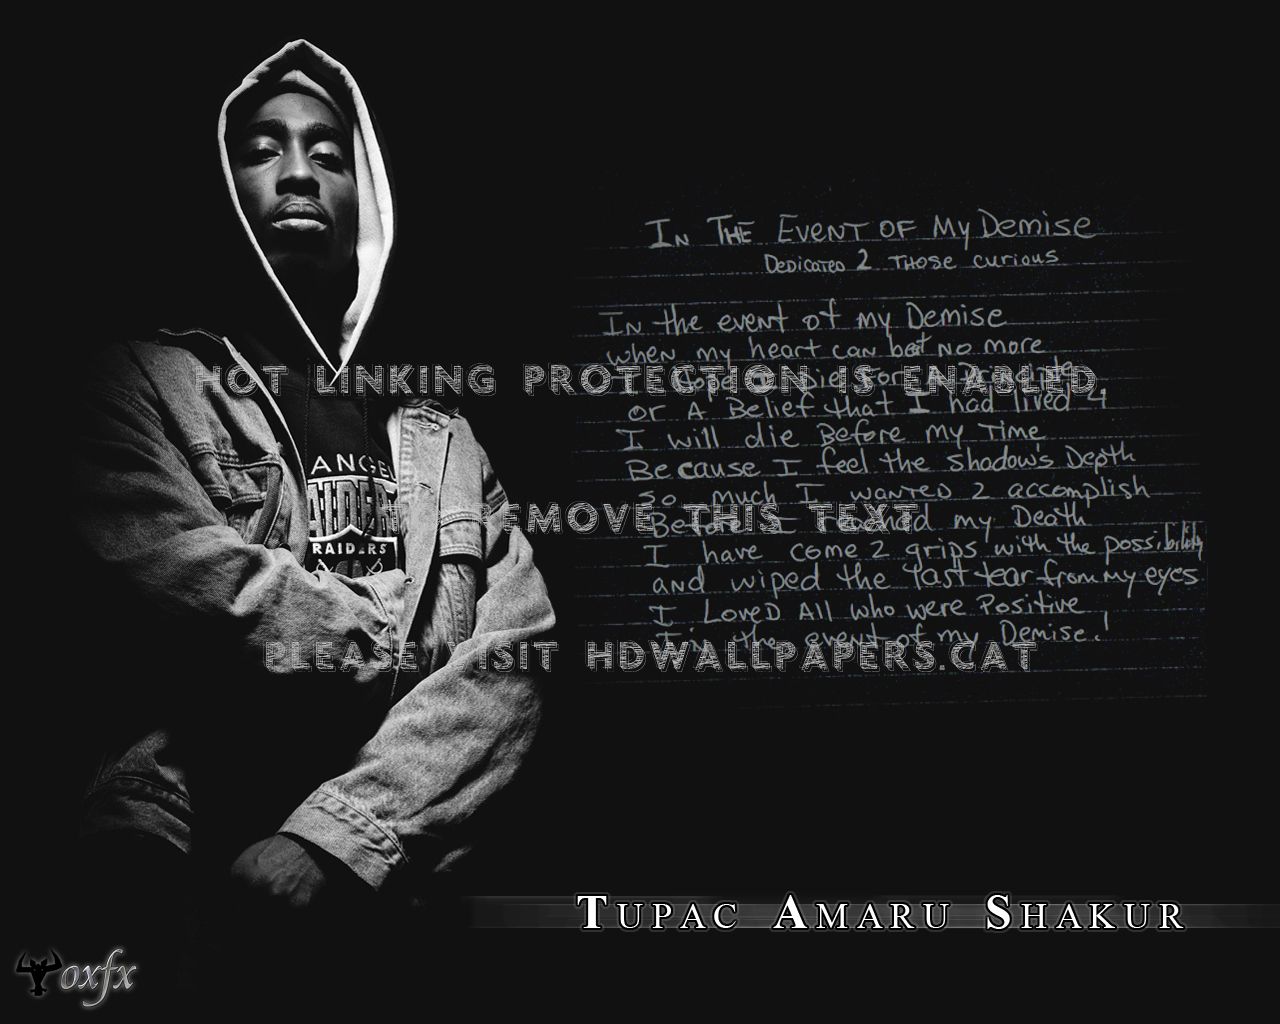 in the event of my demise tupac shakur lone